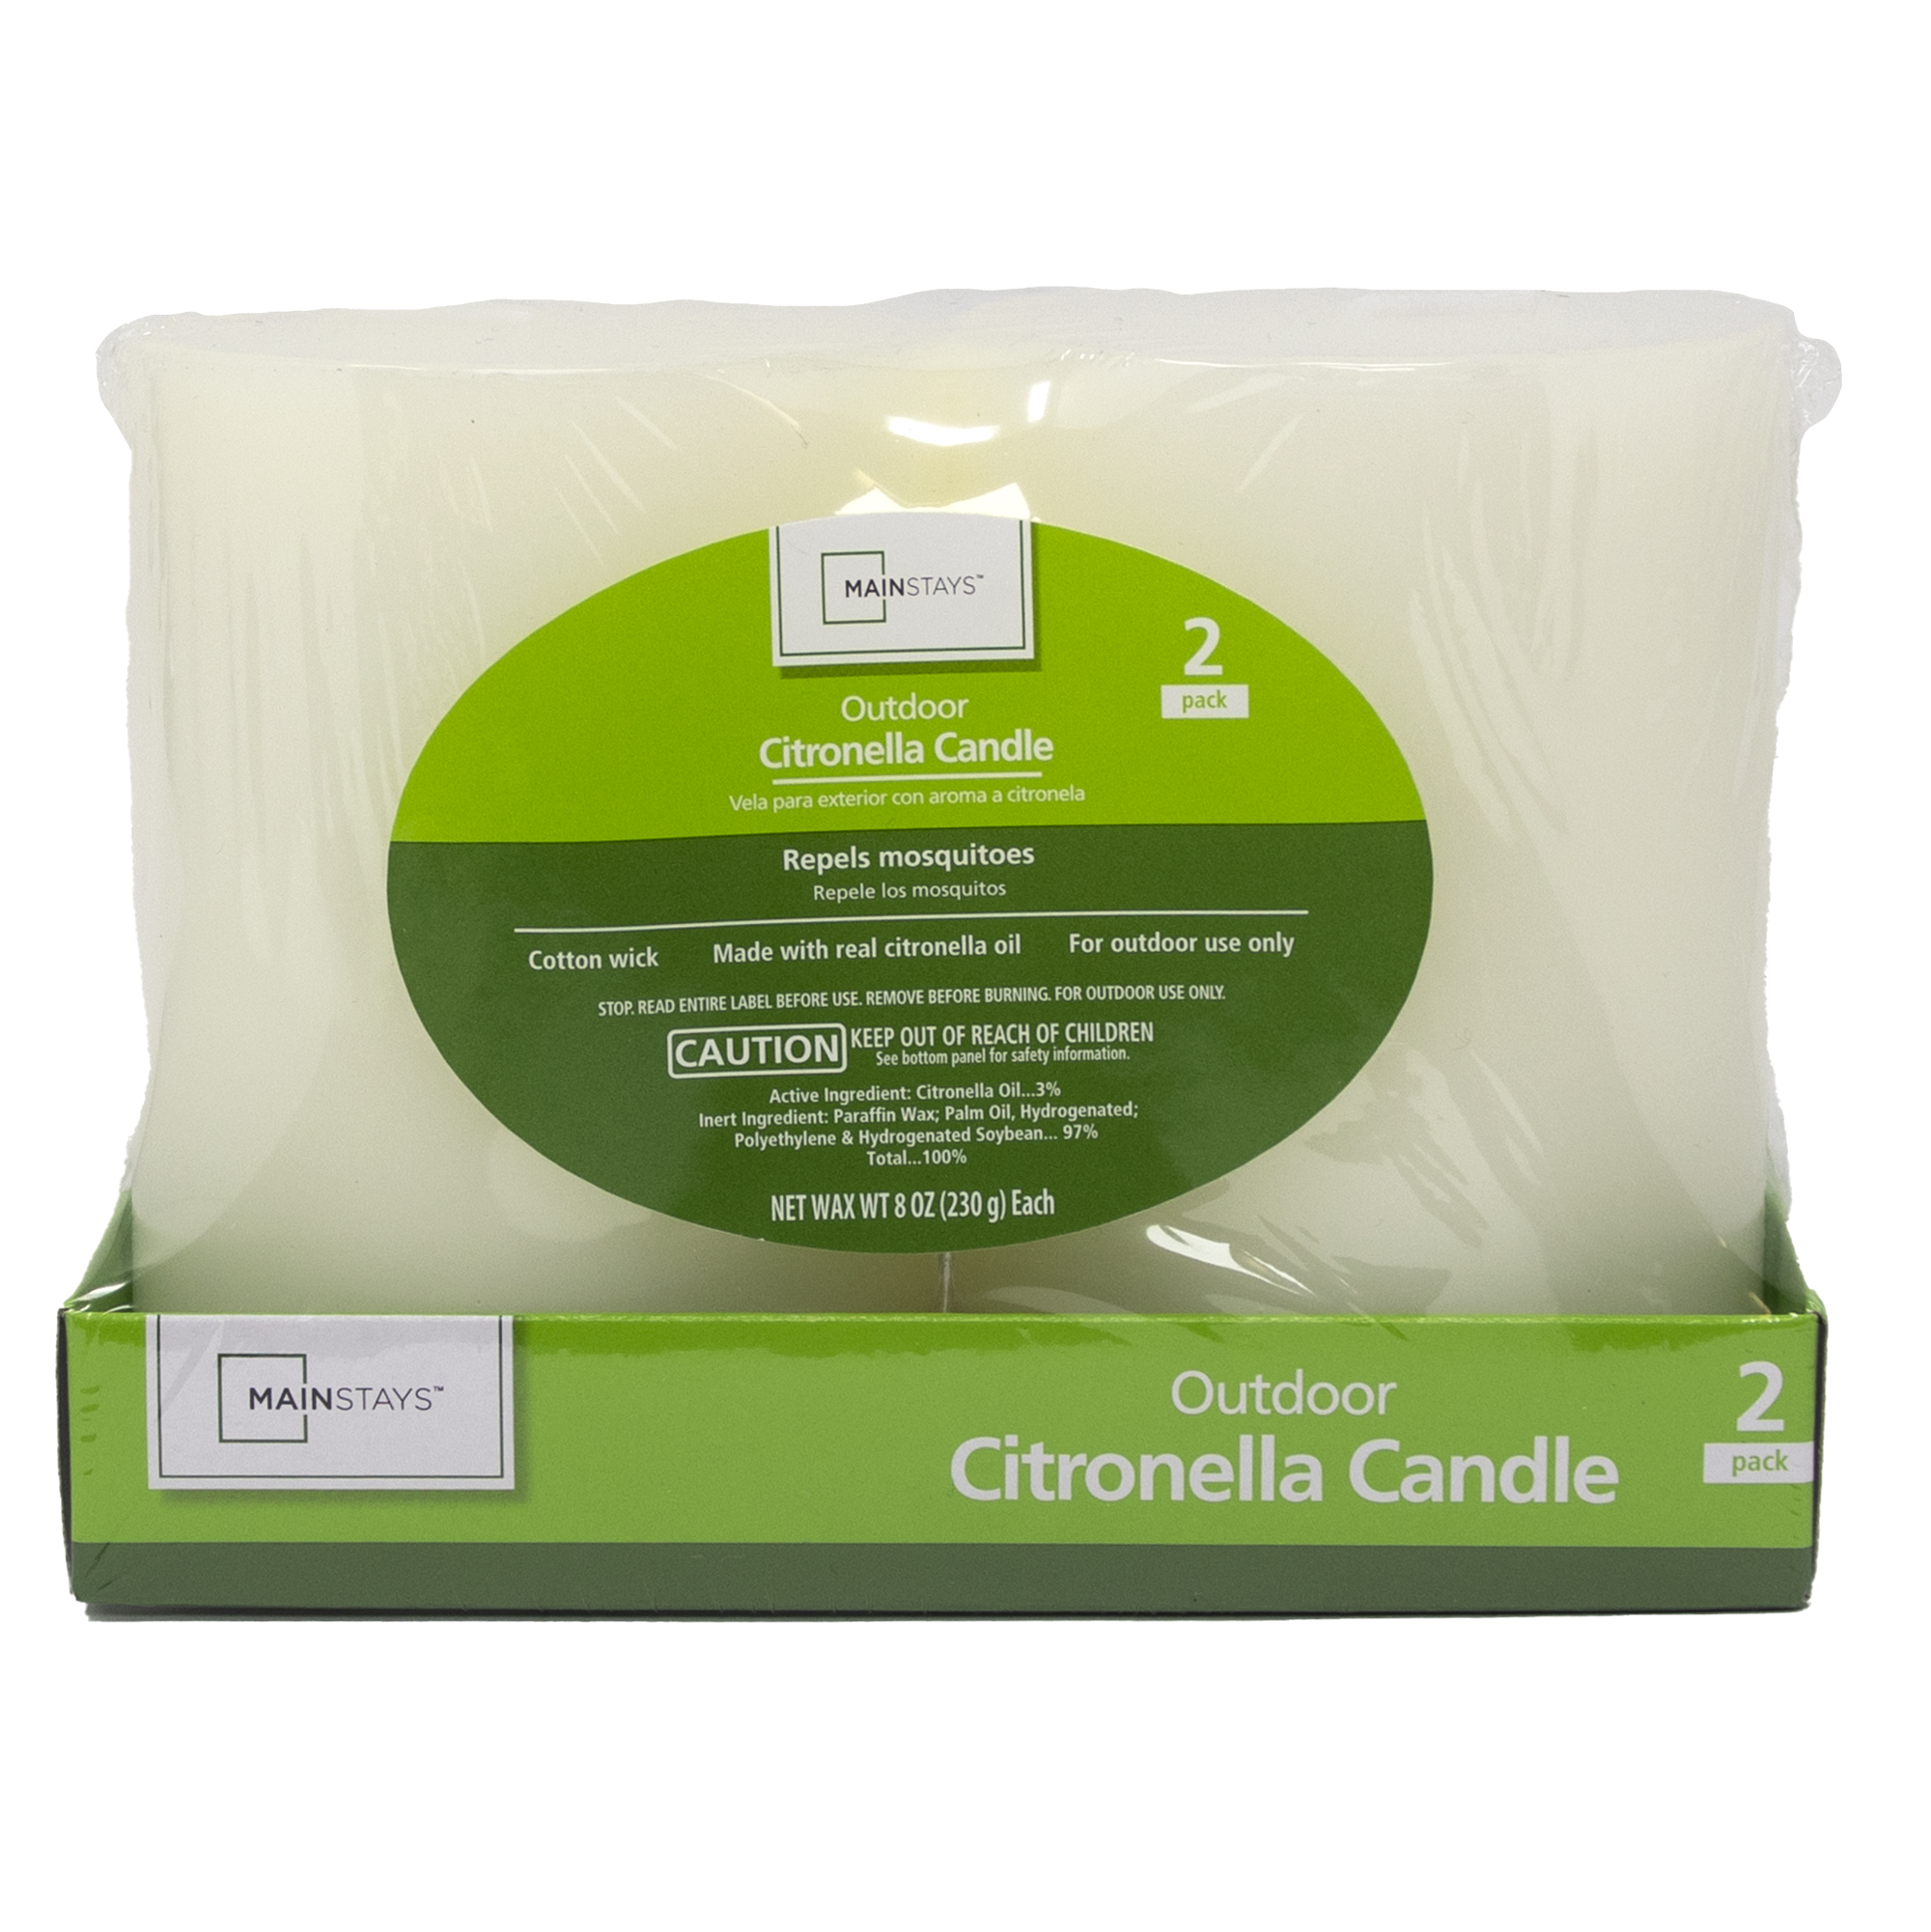 2-Pack 8-Ounce Mainstays Outside Pillar Citronella Candles (Off-White) $4.88 + Free Store Pickup at Walmart or FS on $35+